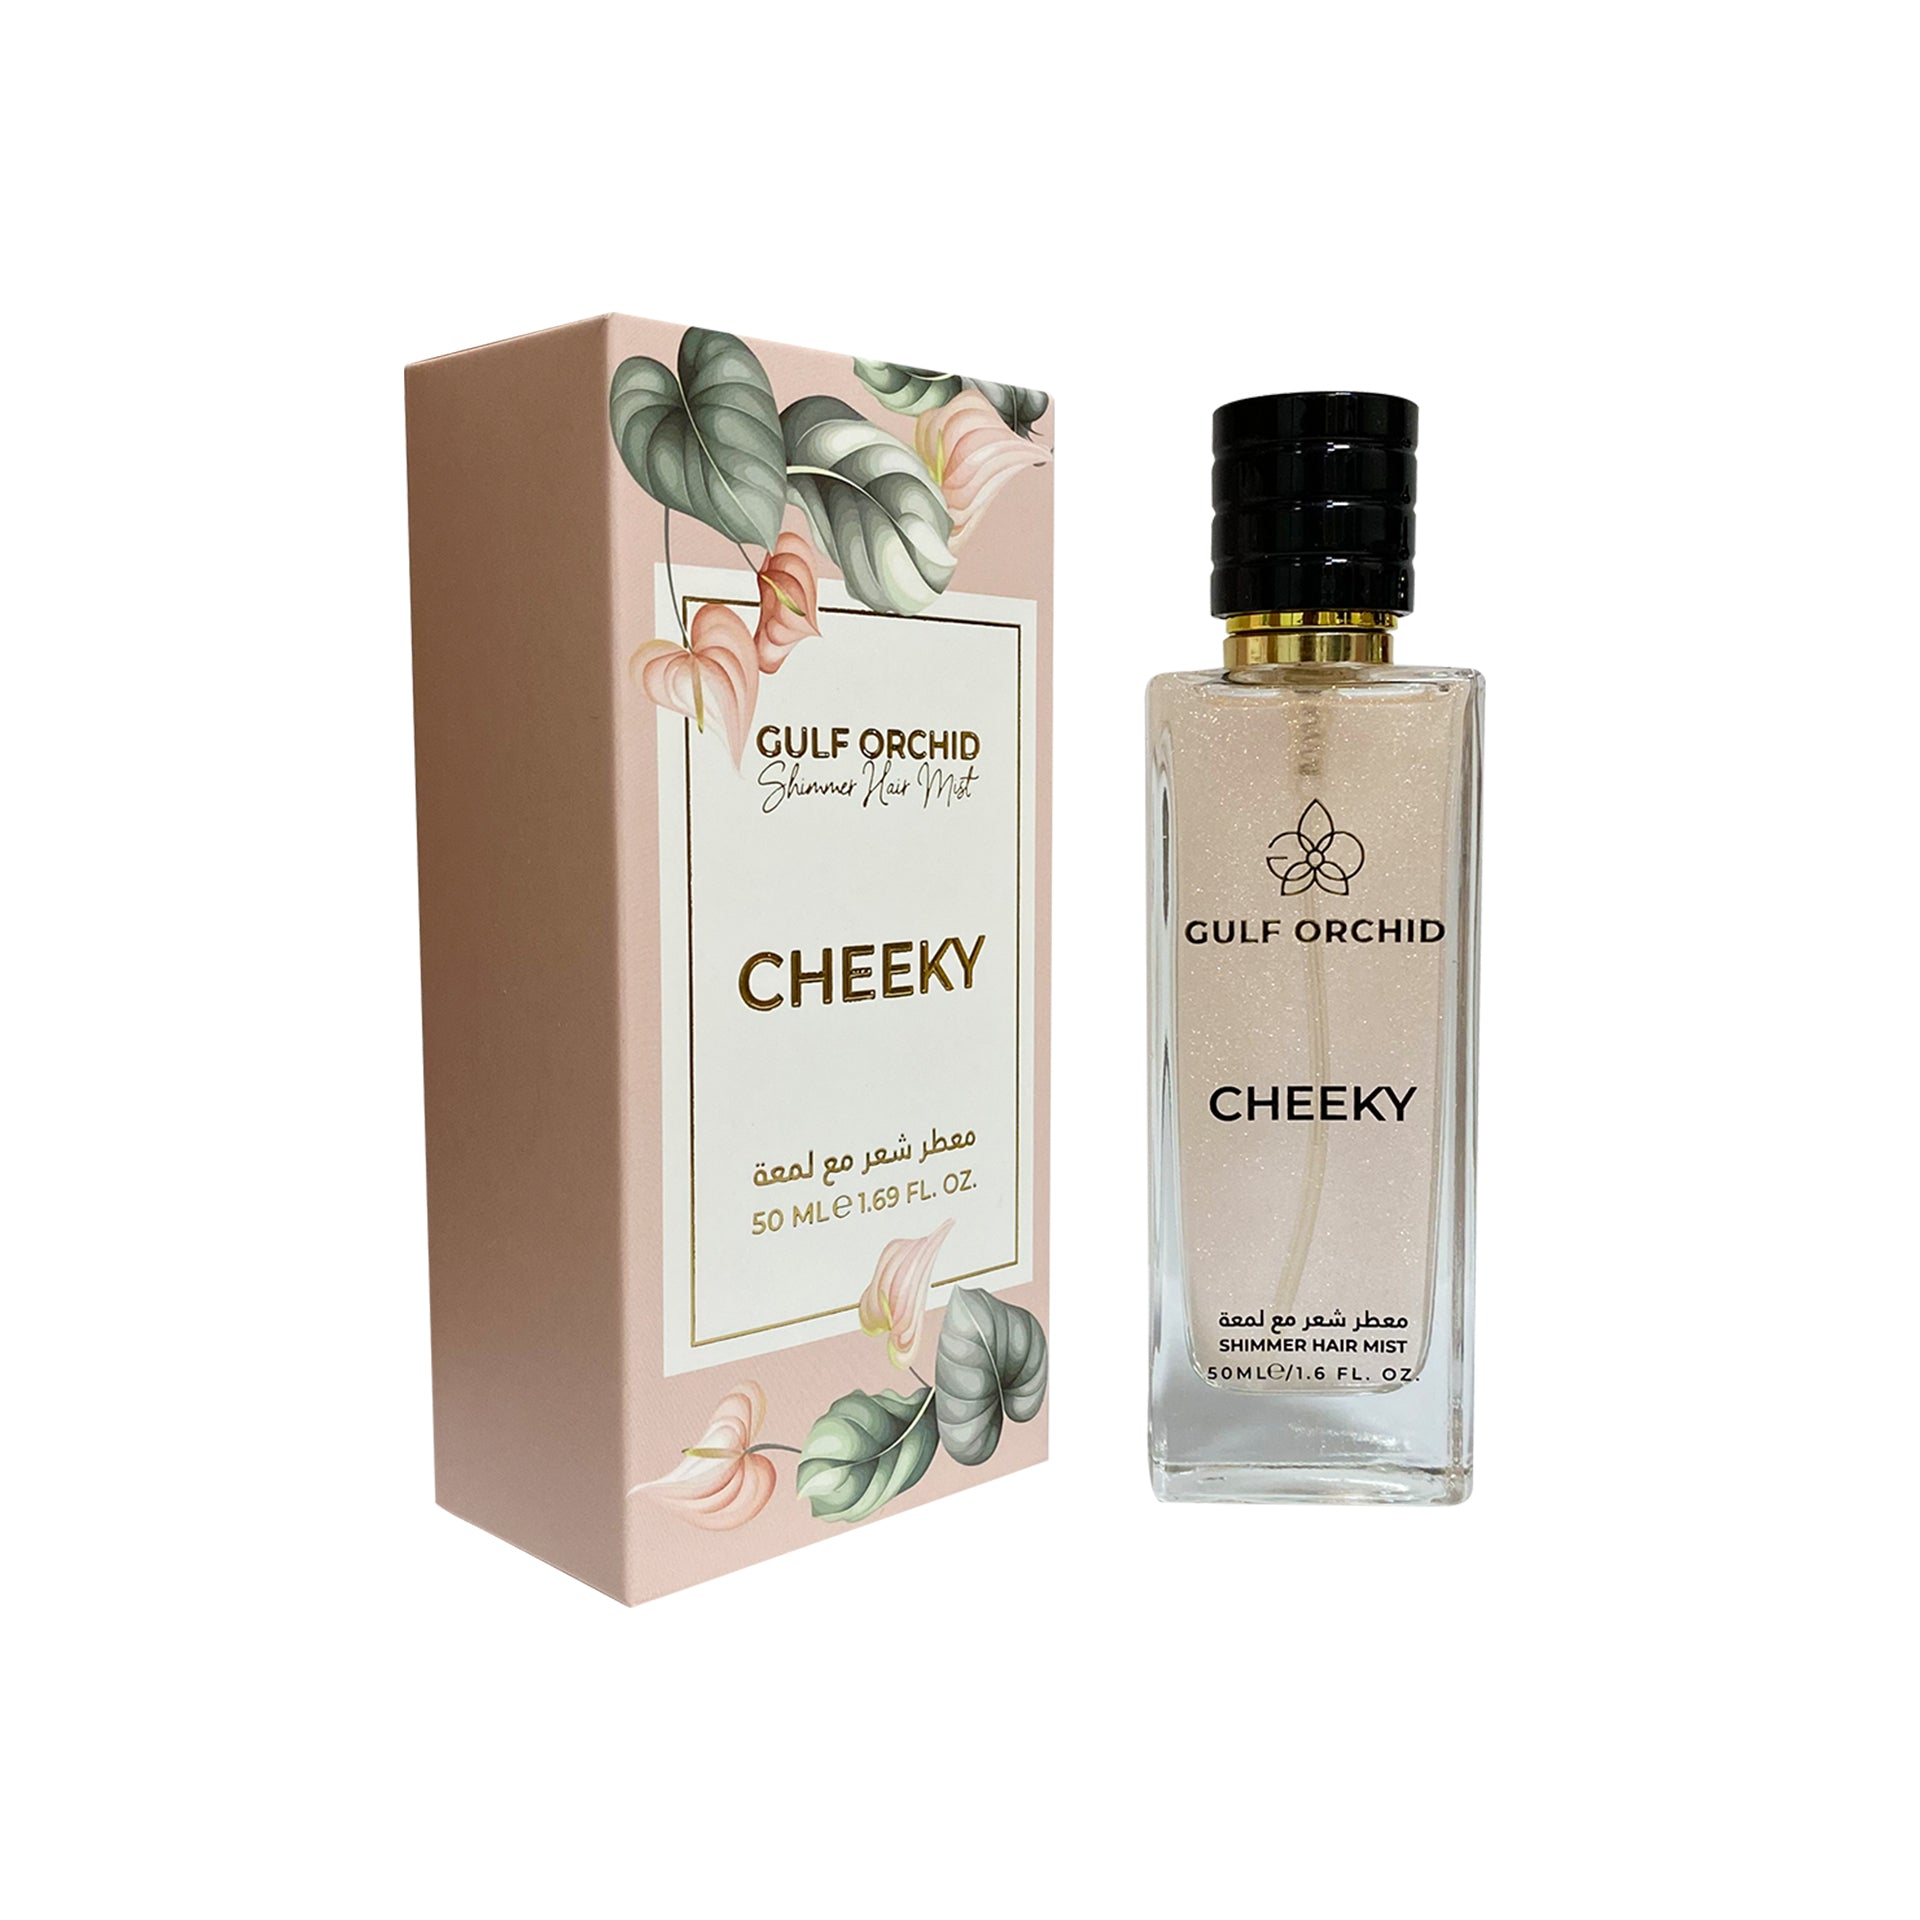 CHEEKY Shimmer Hair Mist - 50ML By Gulf Orchid